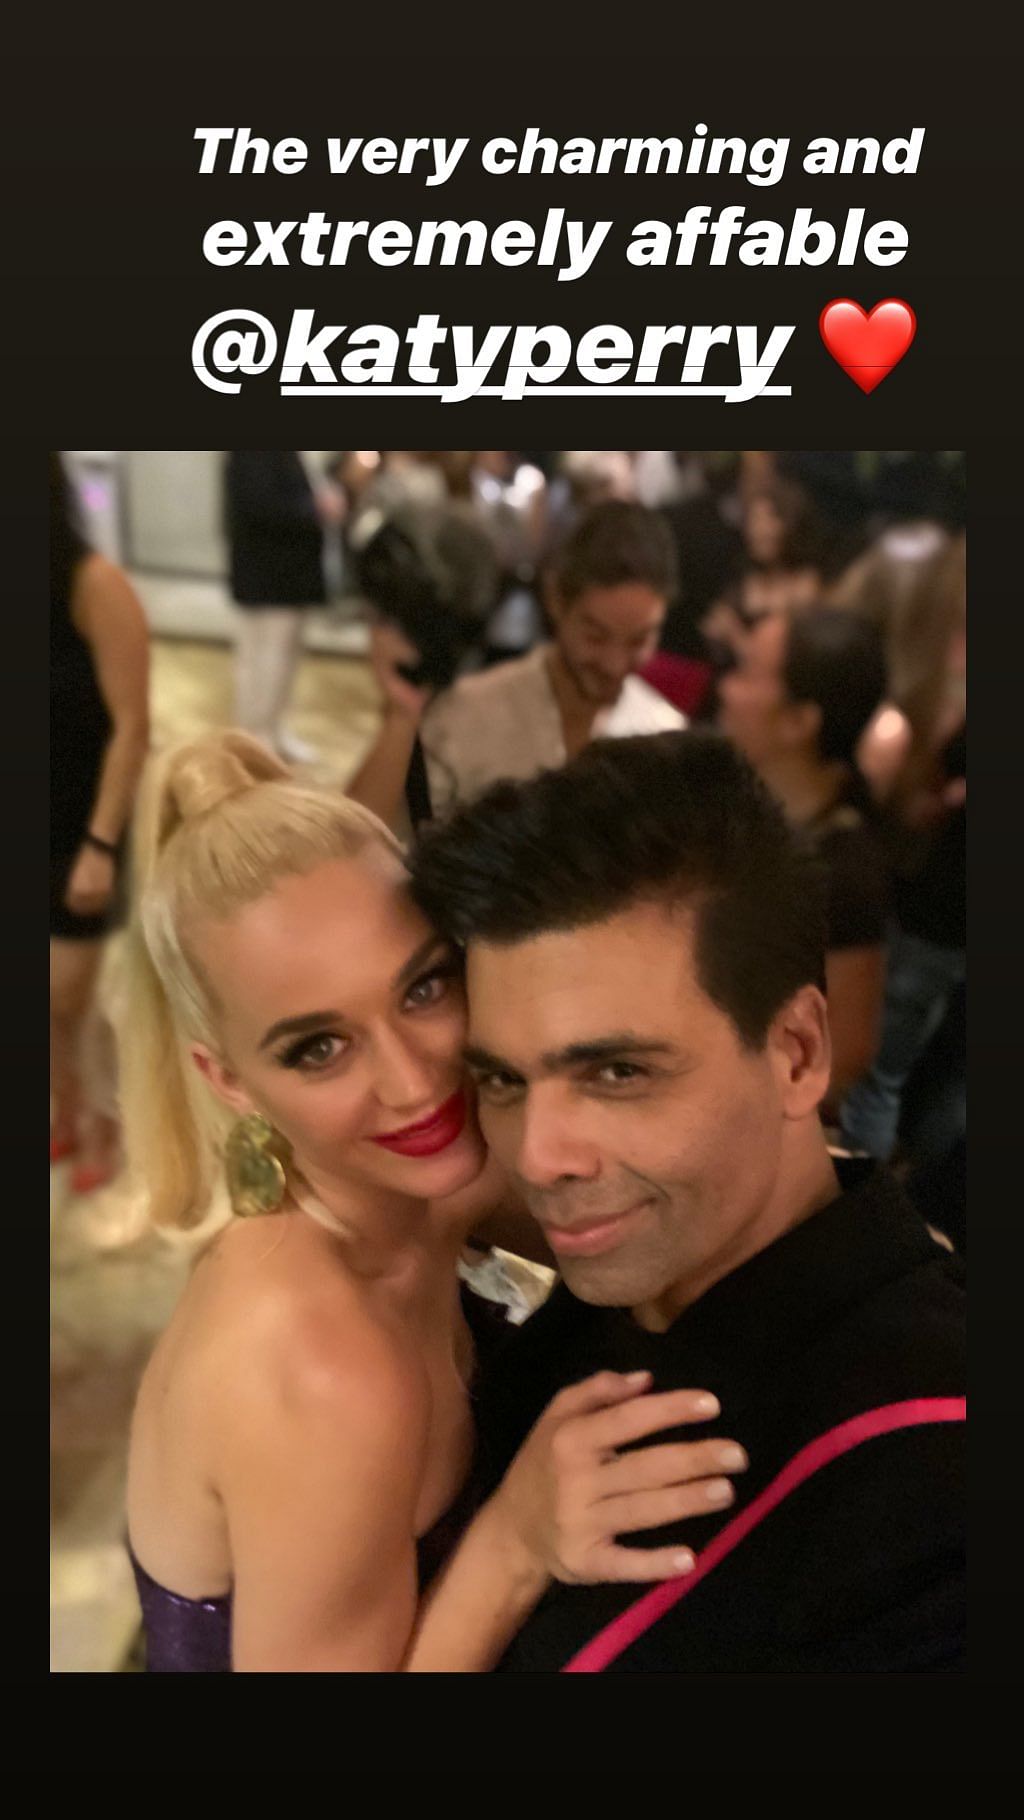 Here are all the inside pictures and videos from Karan Johar’s party for Katy Perry.